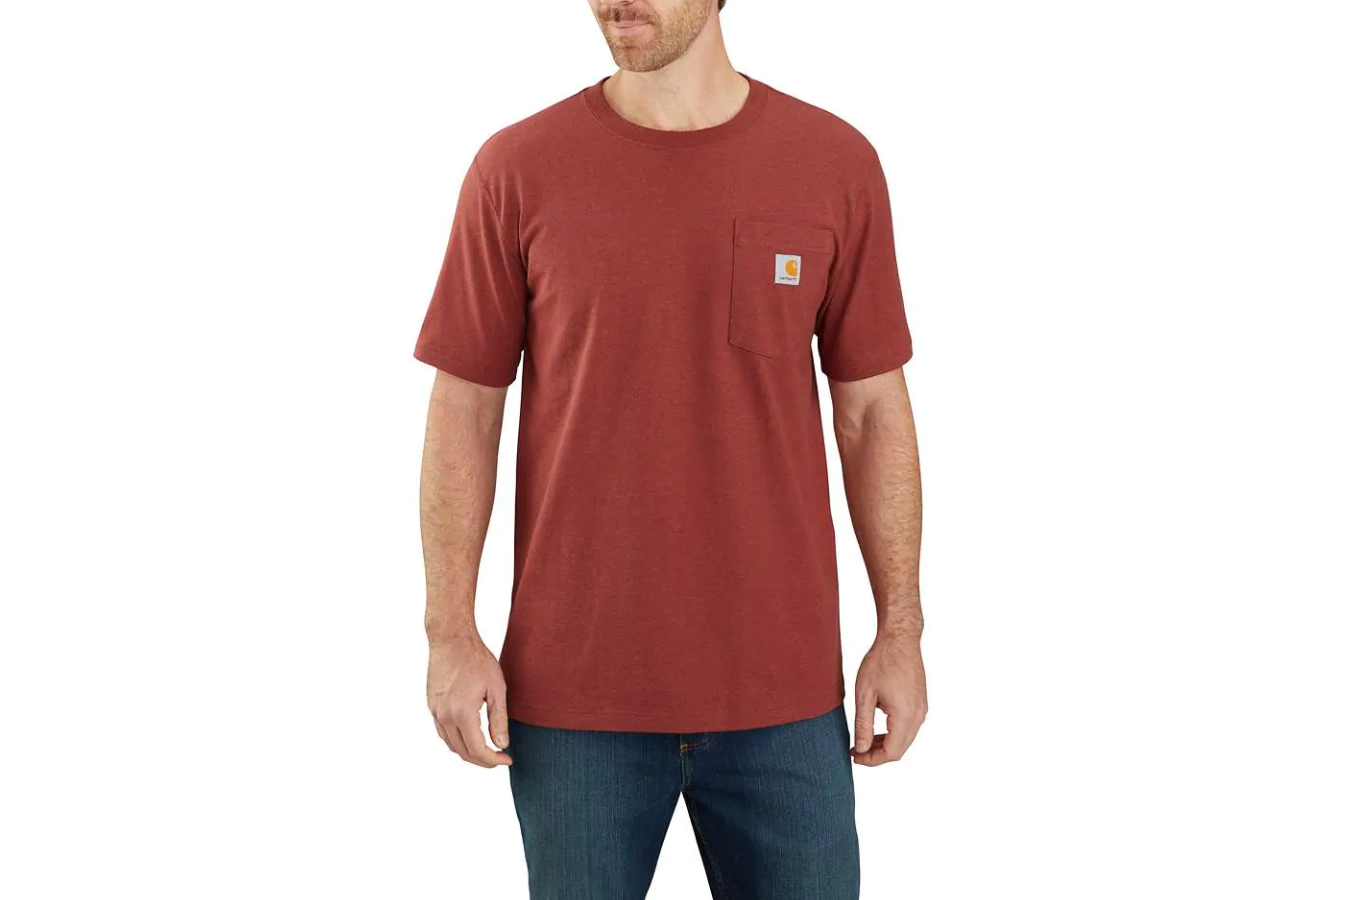 Carhartt Relaxed Fit Heavyweight Short-Sleeve Pocket Rugged Graphic T ...